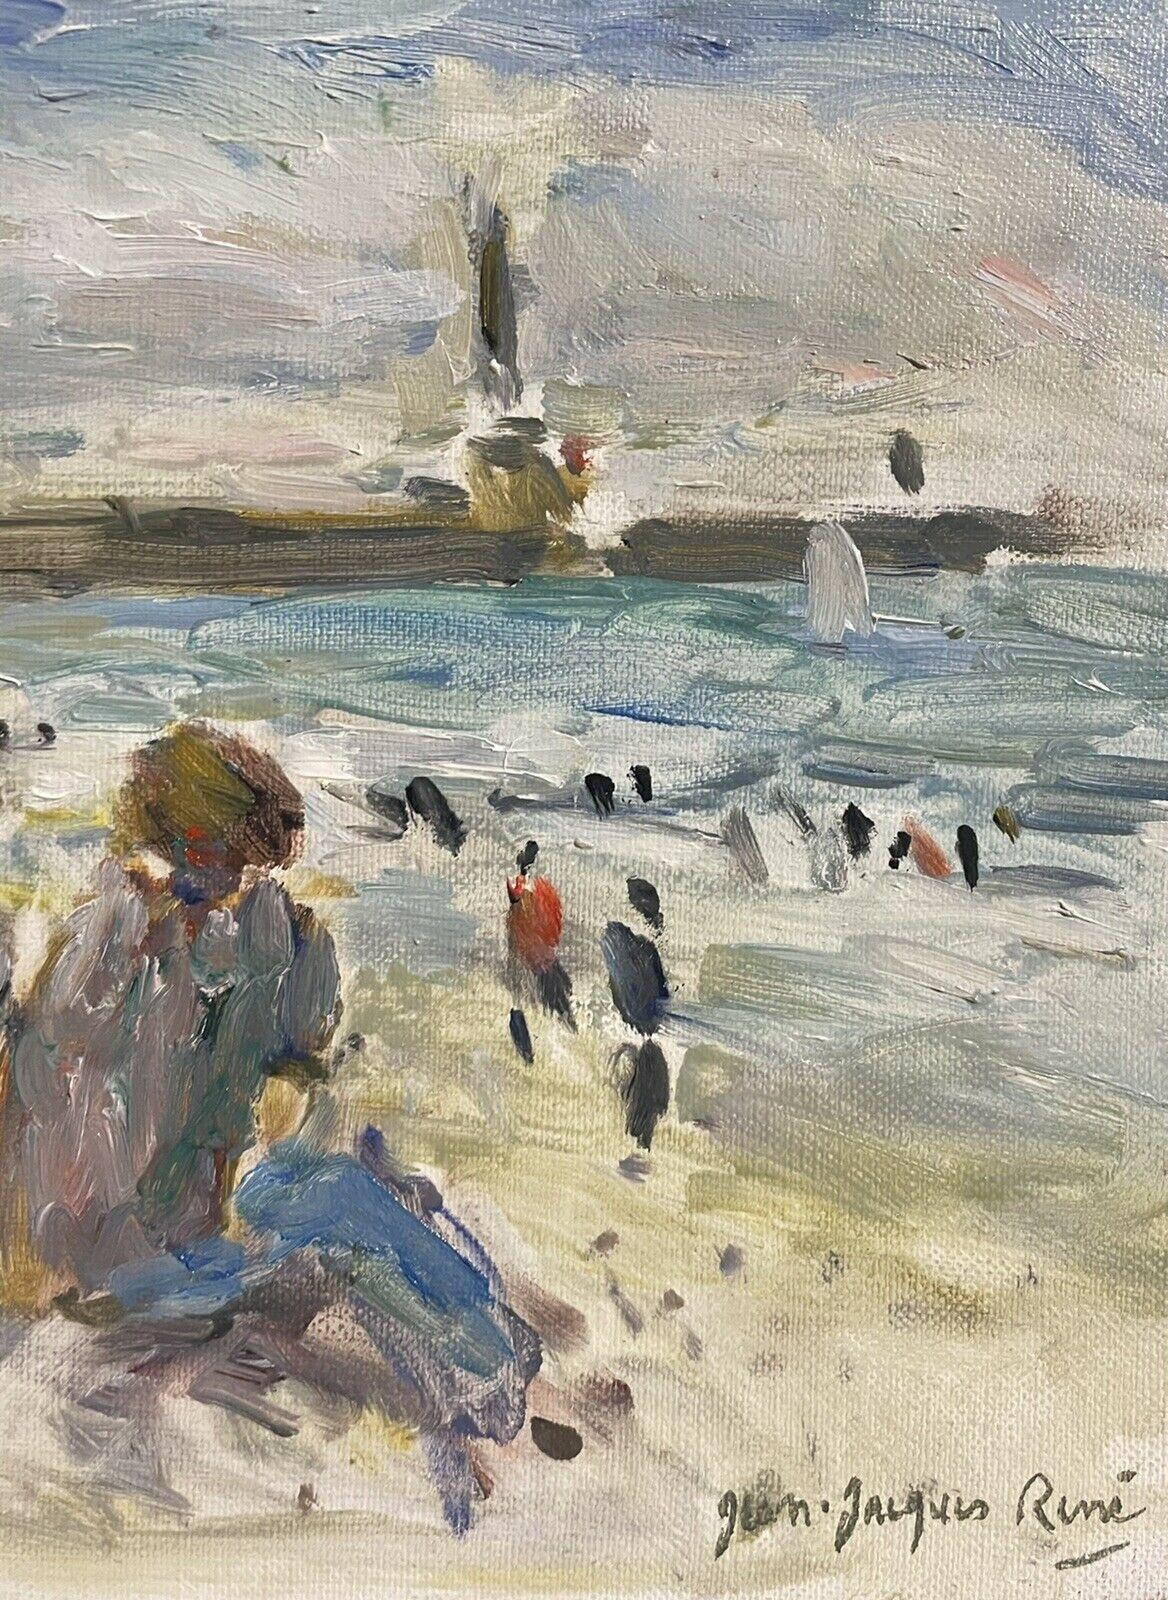 JEAN JACQUES RENE (FRENCH B.1943) SIGNED OIL - FIGURES SEATED LE HAVRE BEACH - Beige Landscape Painting by Jean Jacques Rene